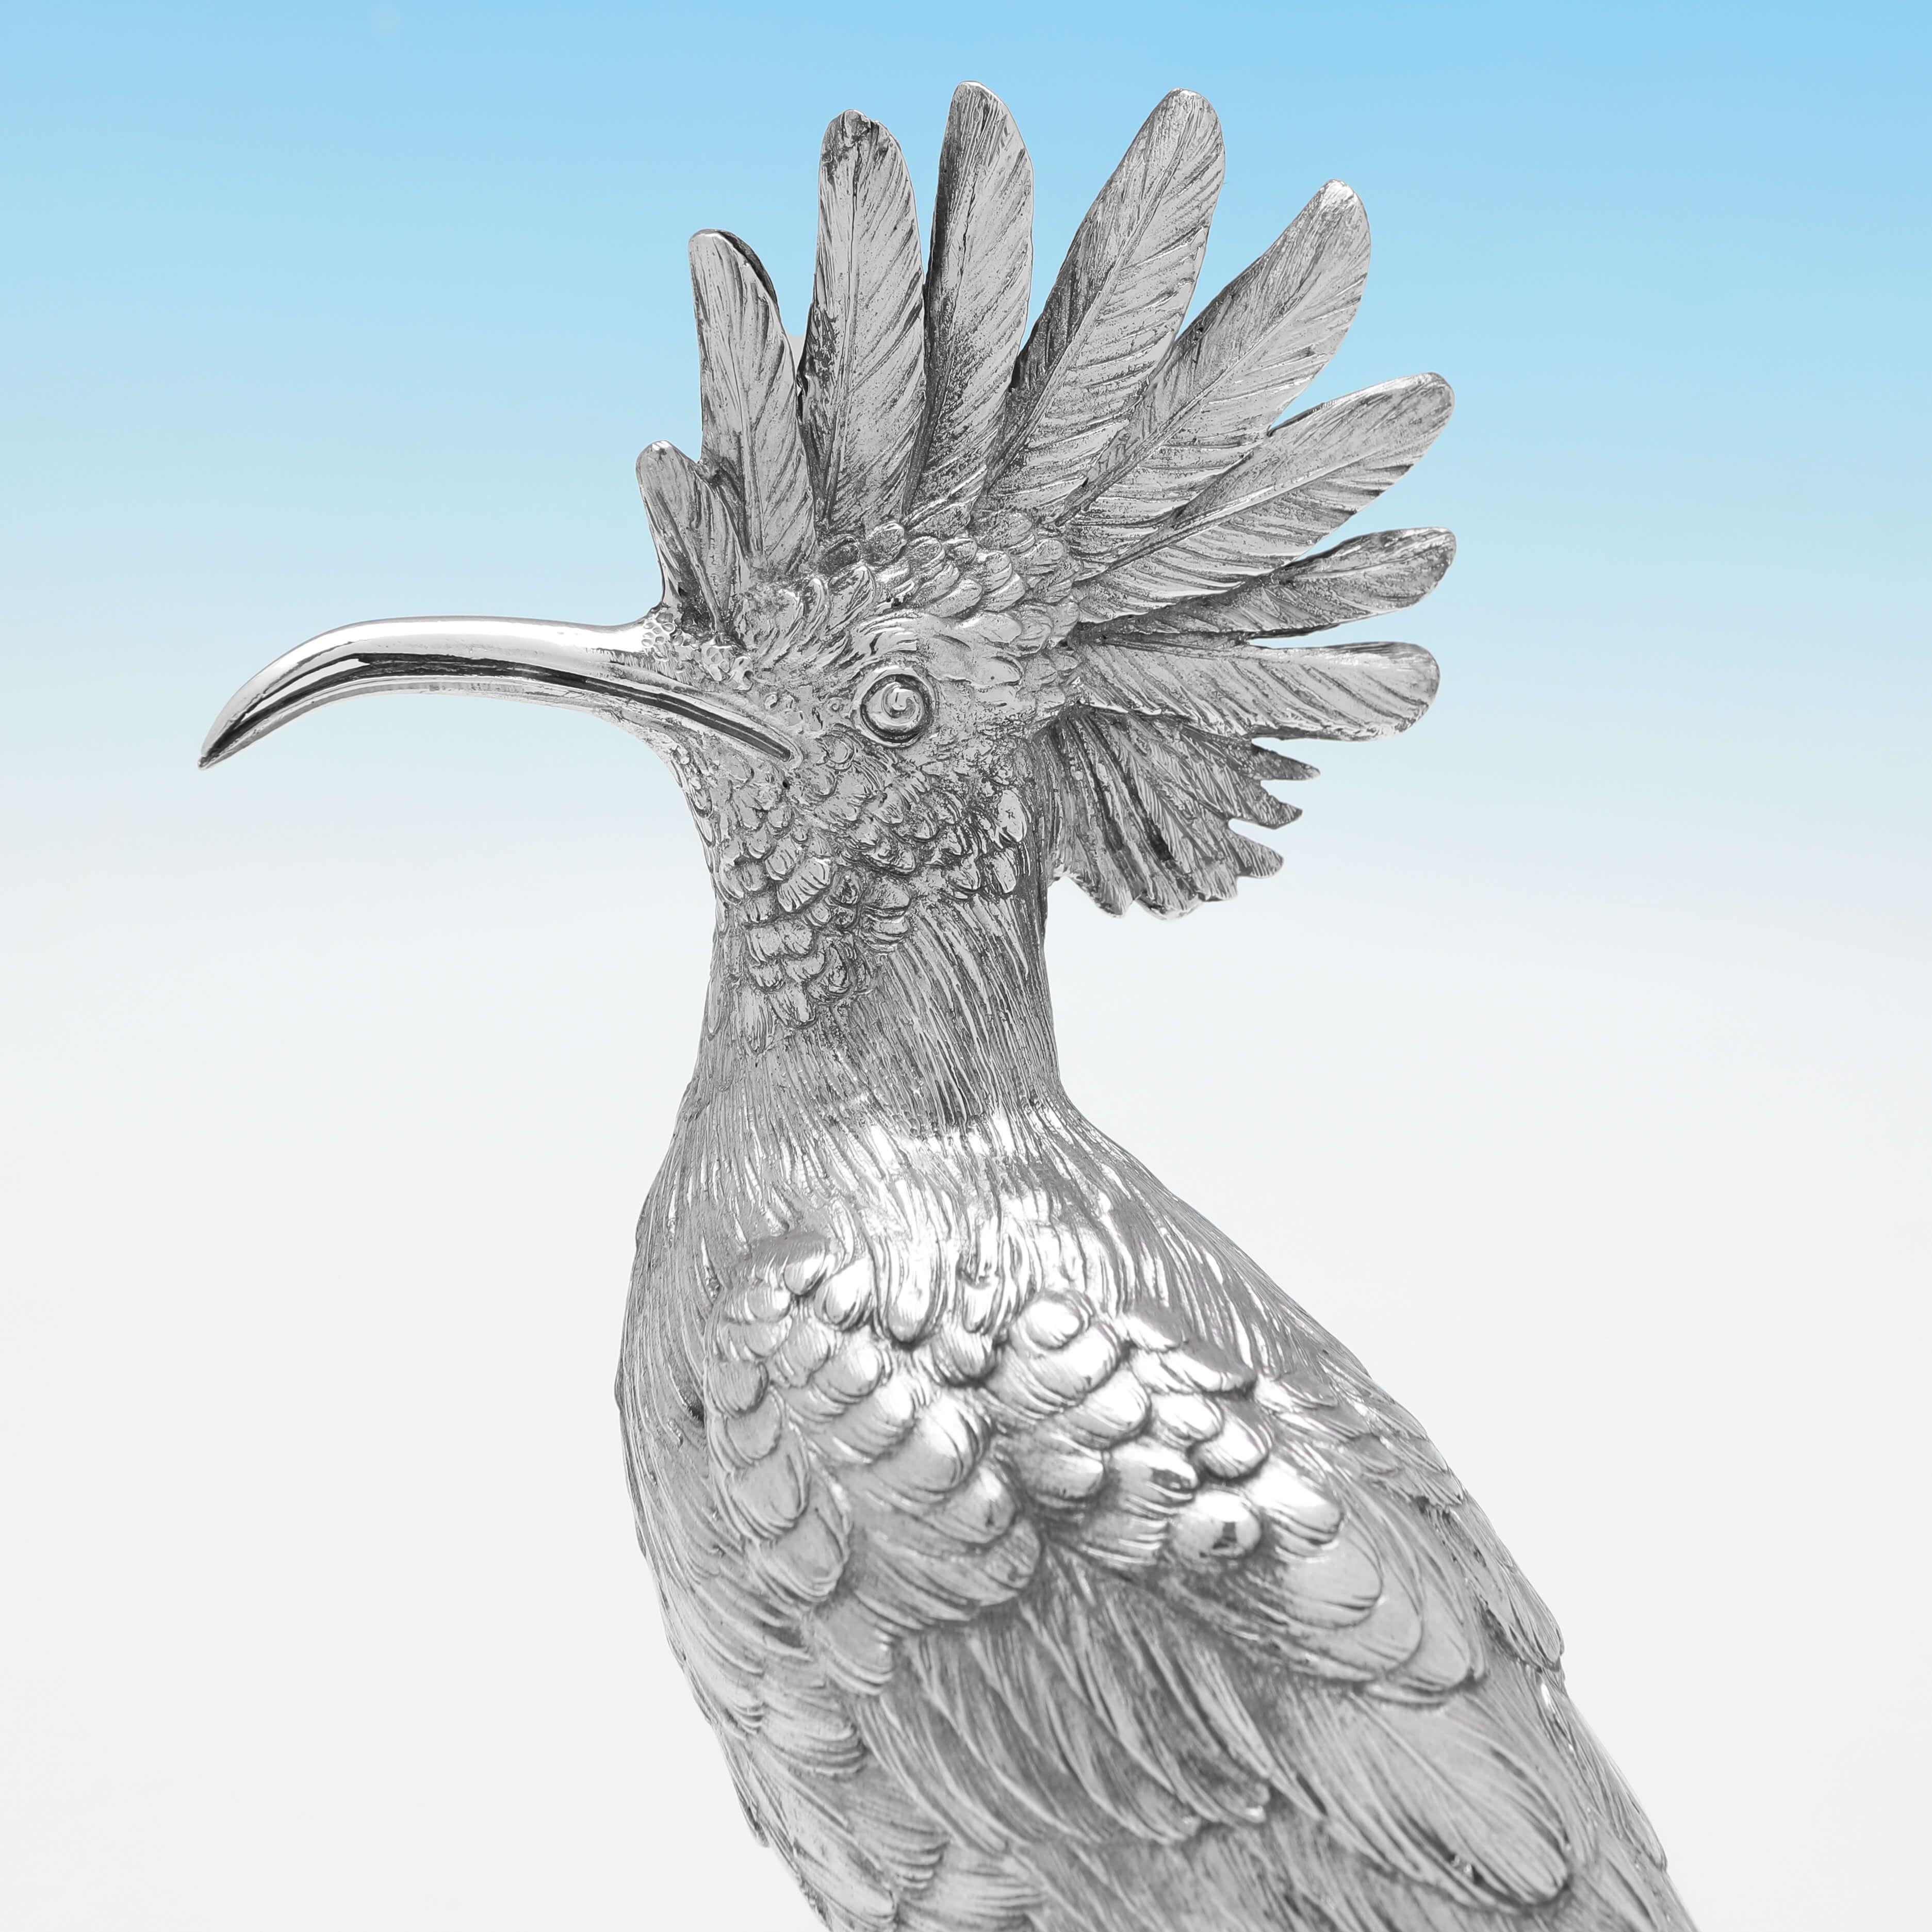 Early 20th Century Rare Sterling Silver Hoopoe Model - Import Mark London 1913 by Berthold Muller For Sale